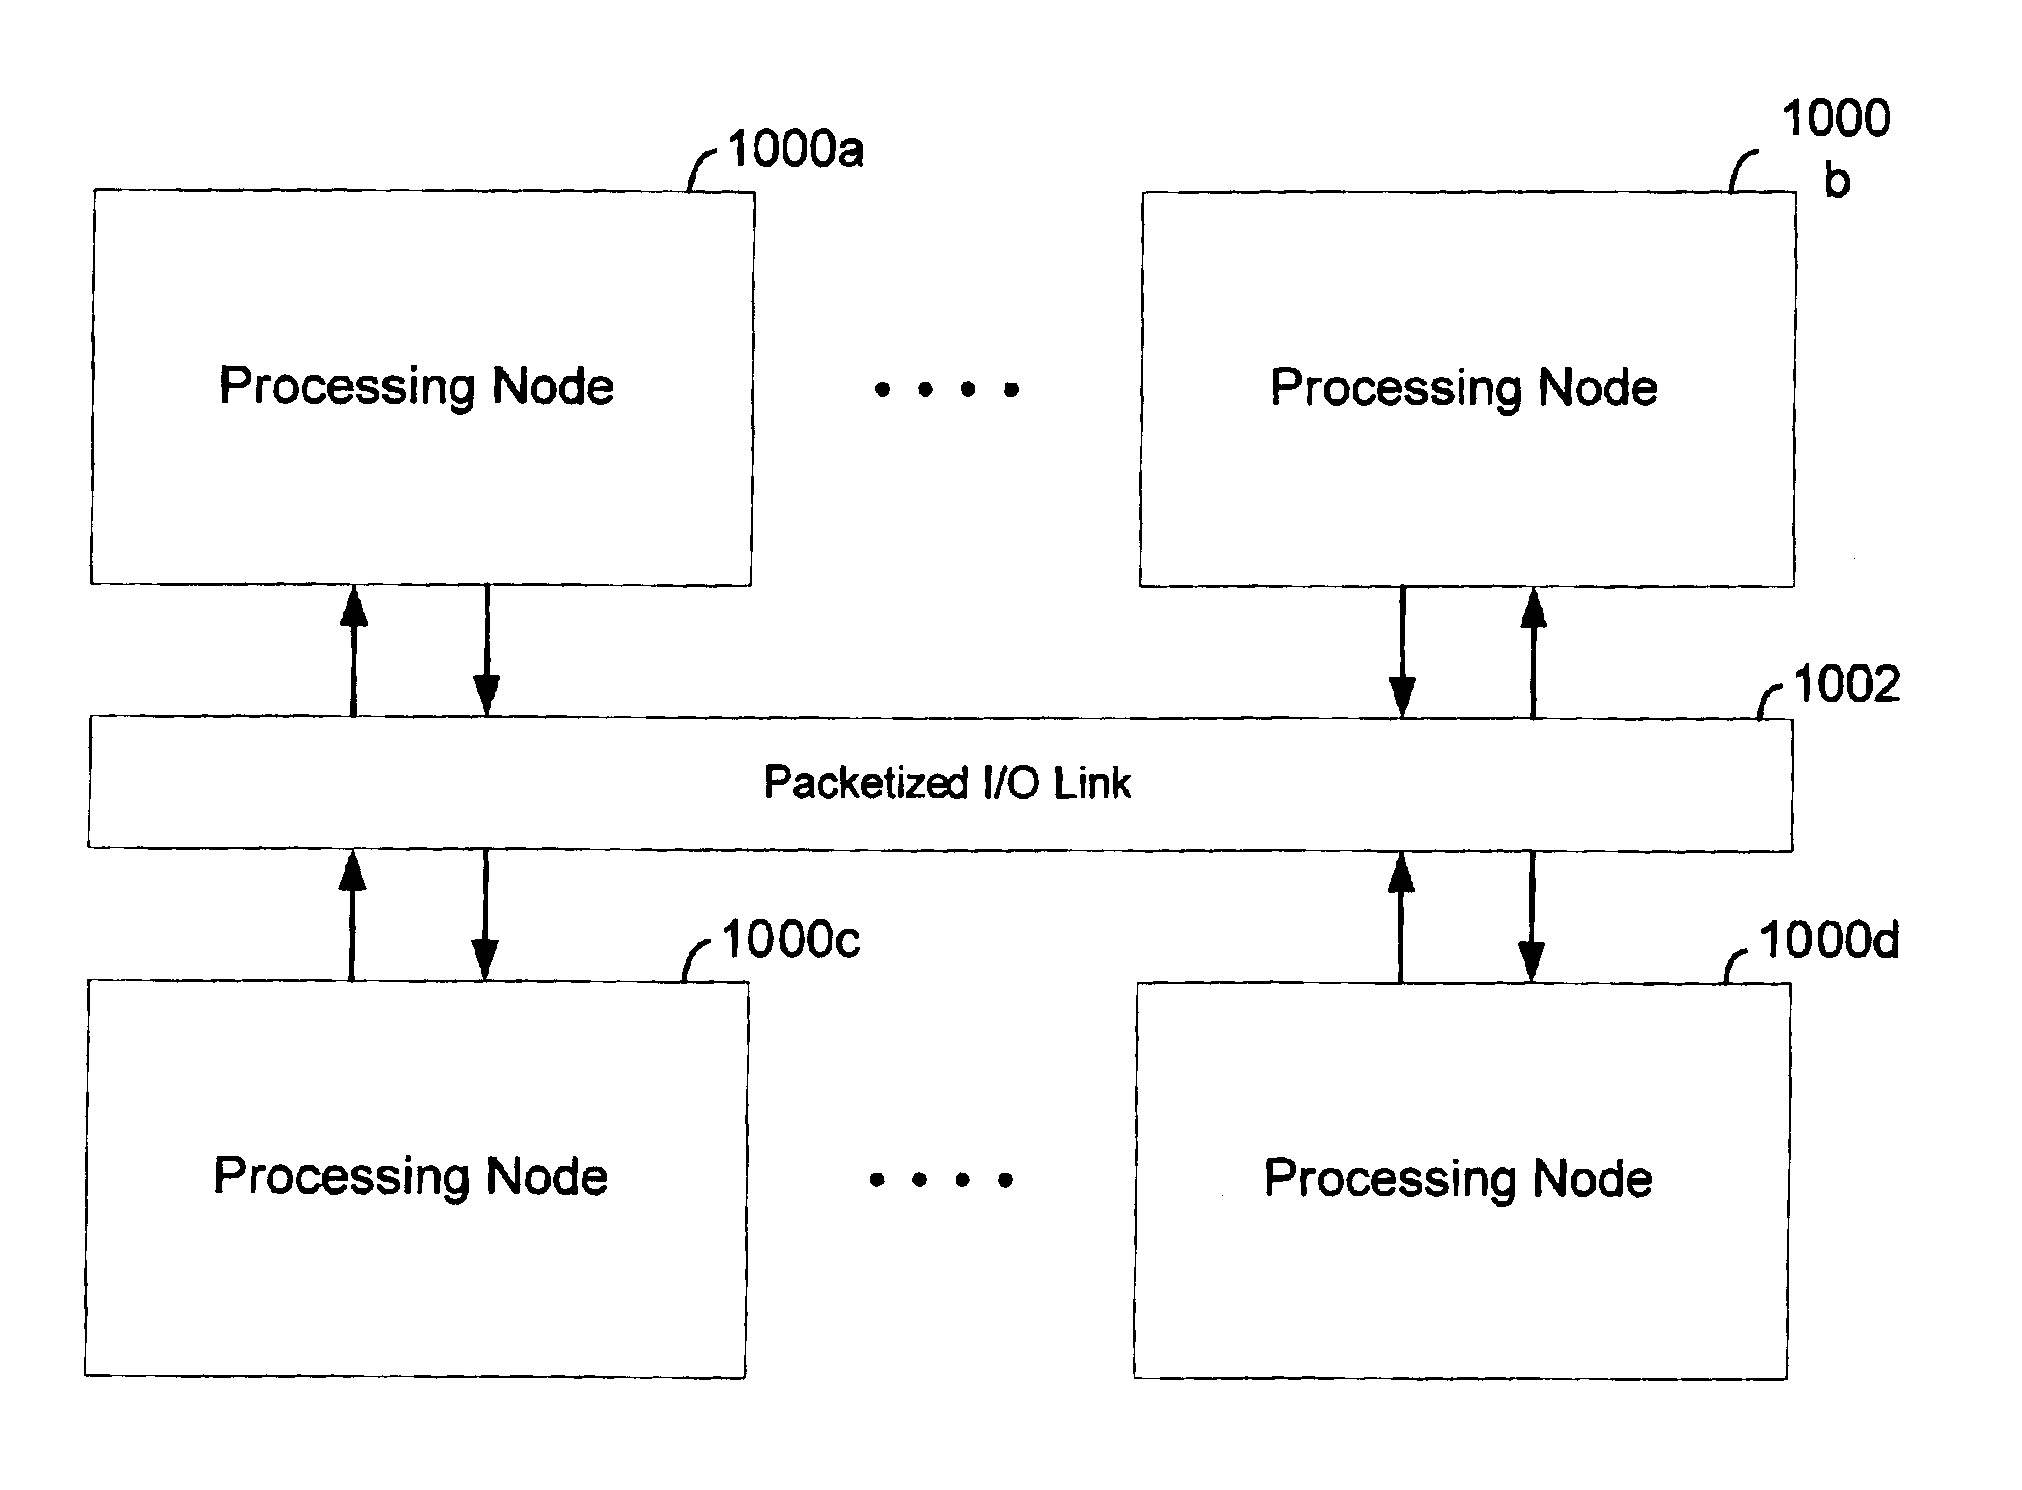 Scalable cache coherent distributed shared memory processing system